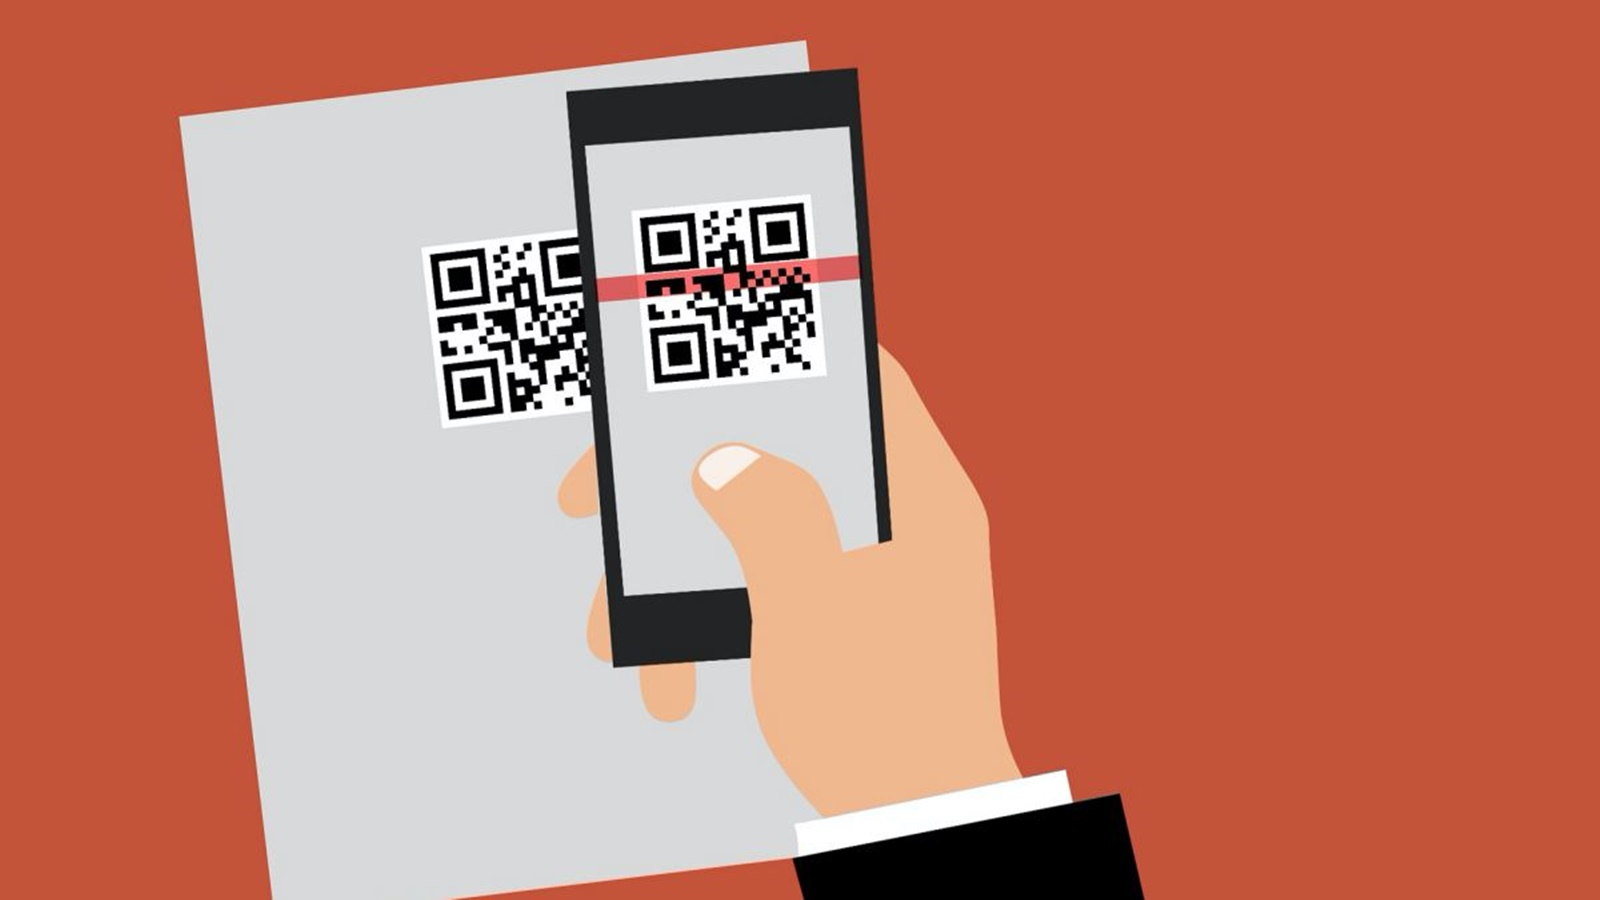 How to identify and protect yourself from QR code scams